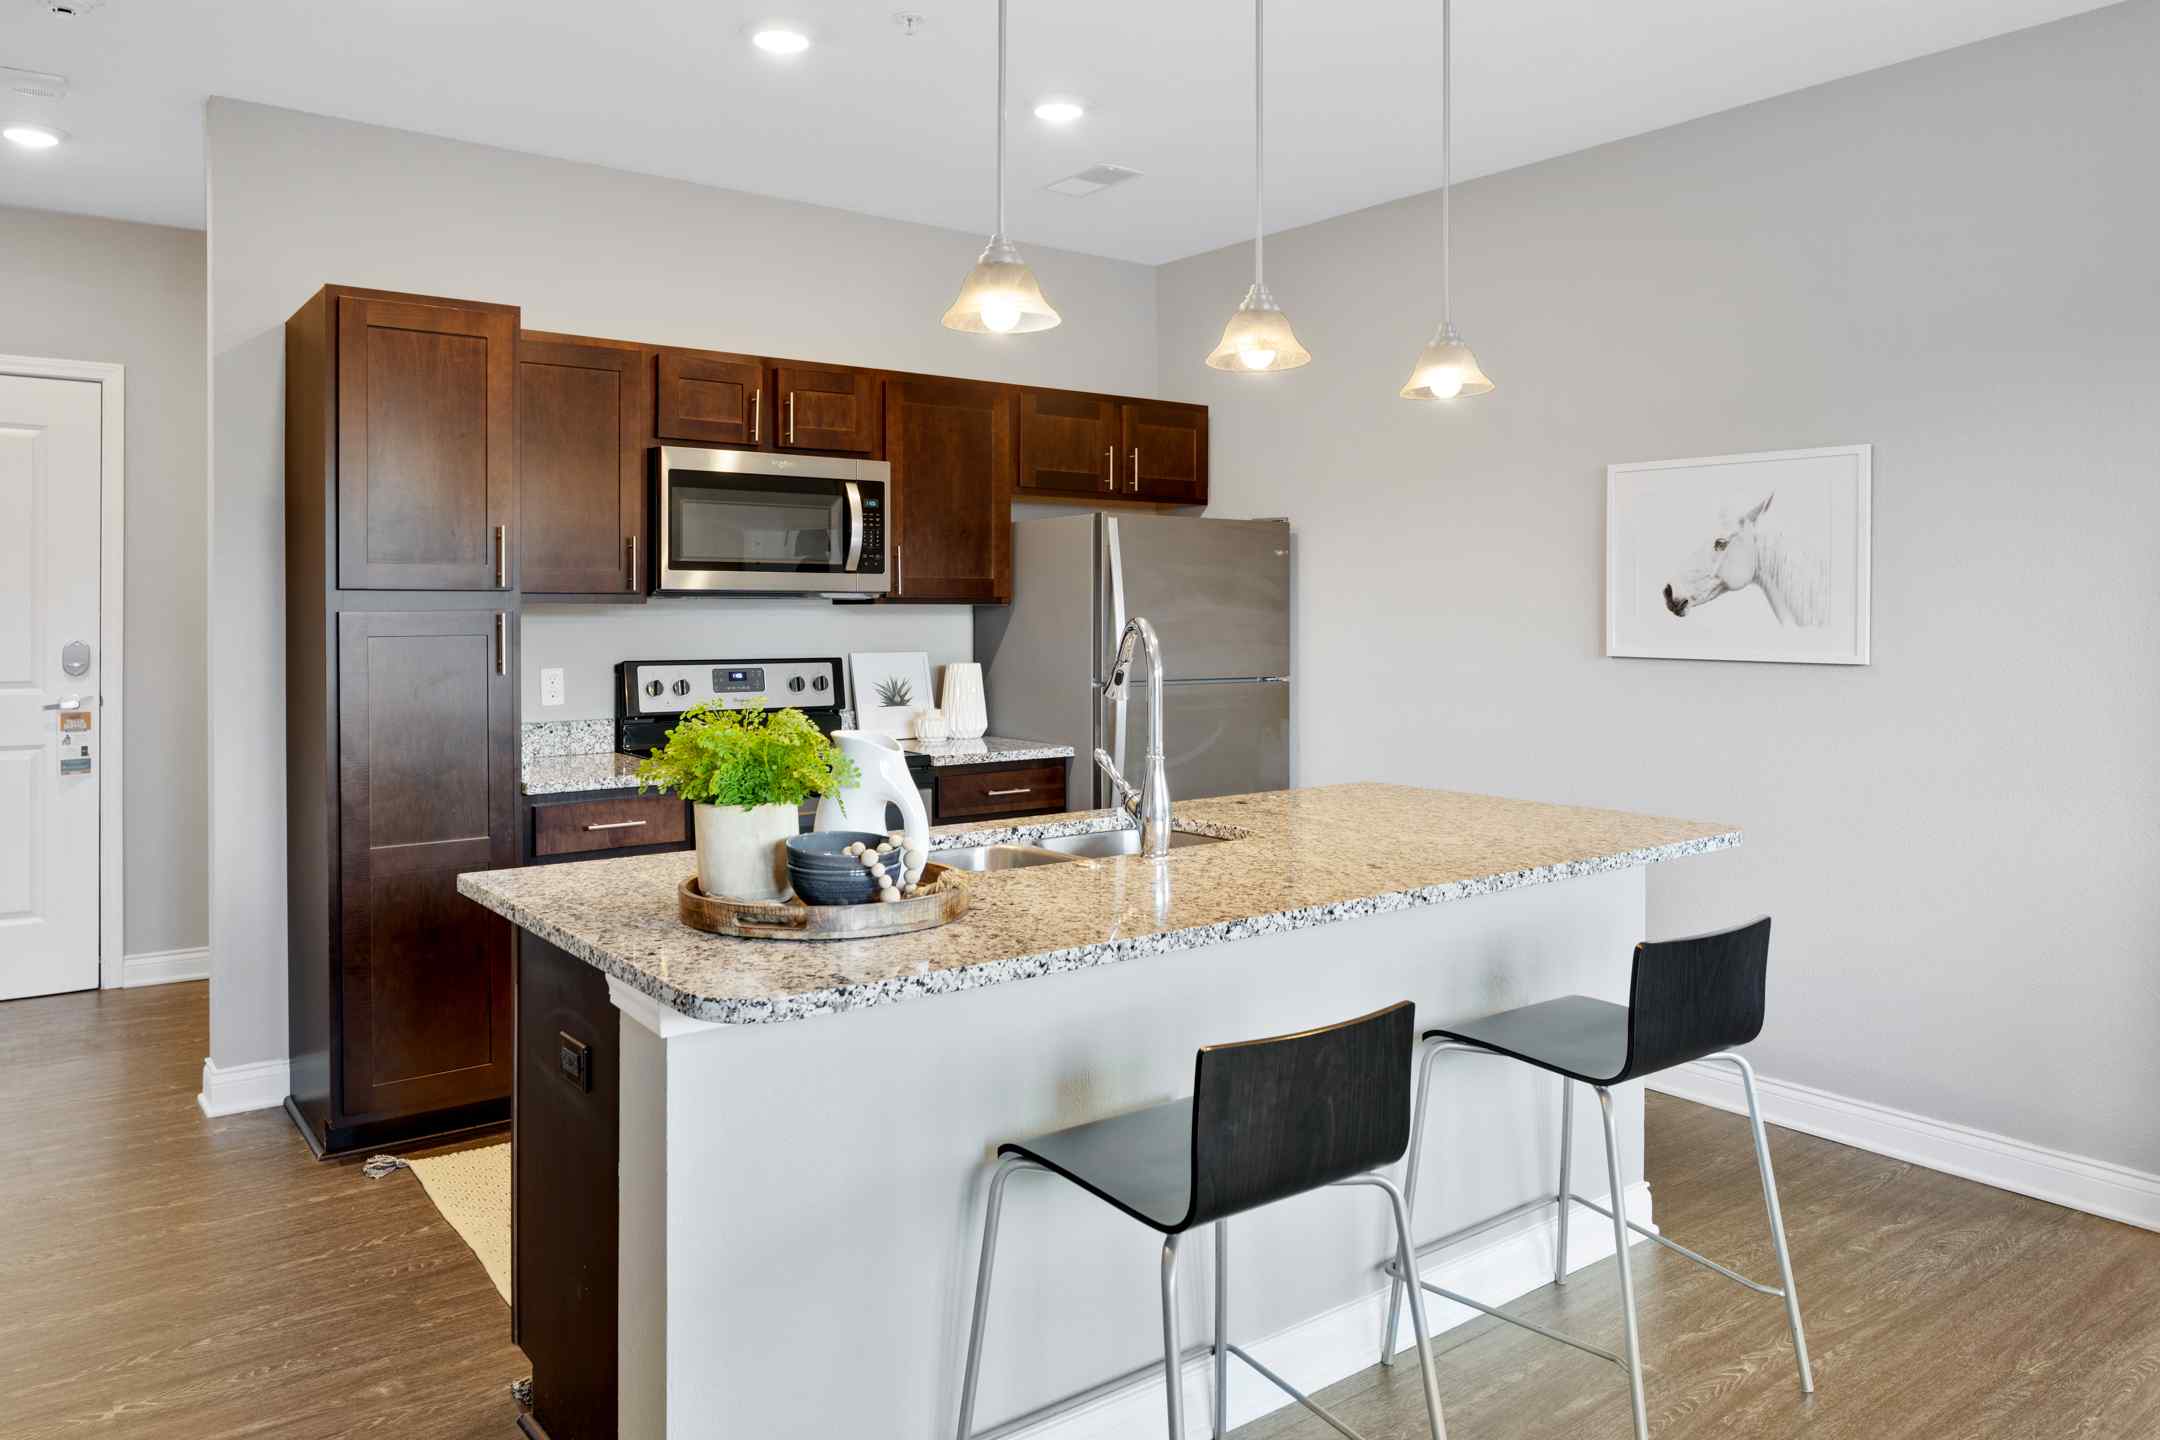 A large kitchen island with bar seating, and a fully equipped kitchen.